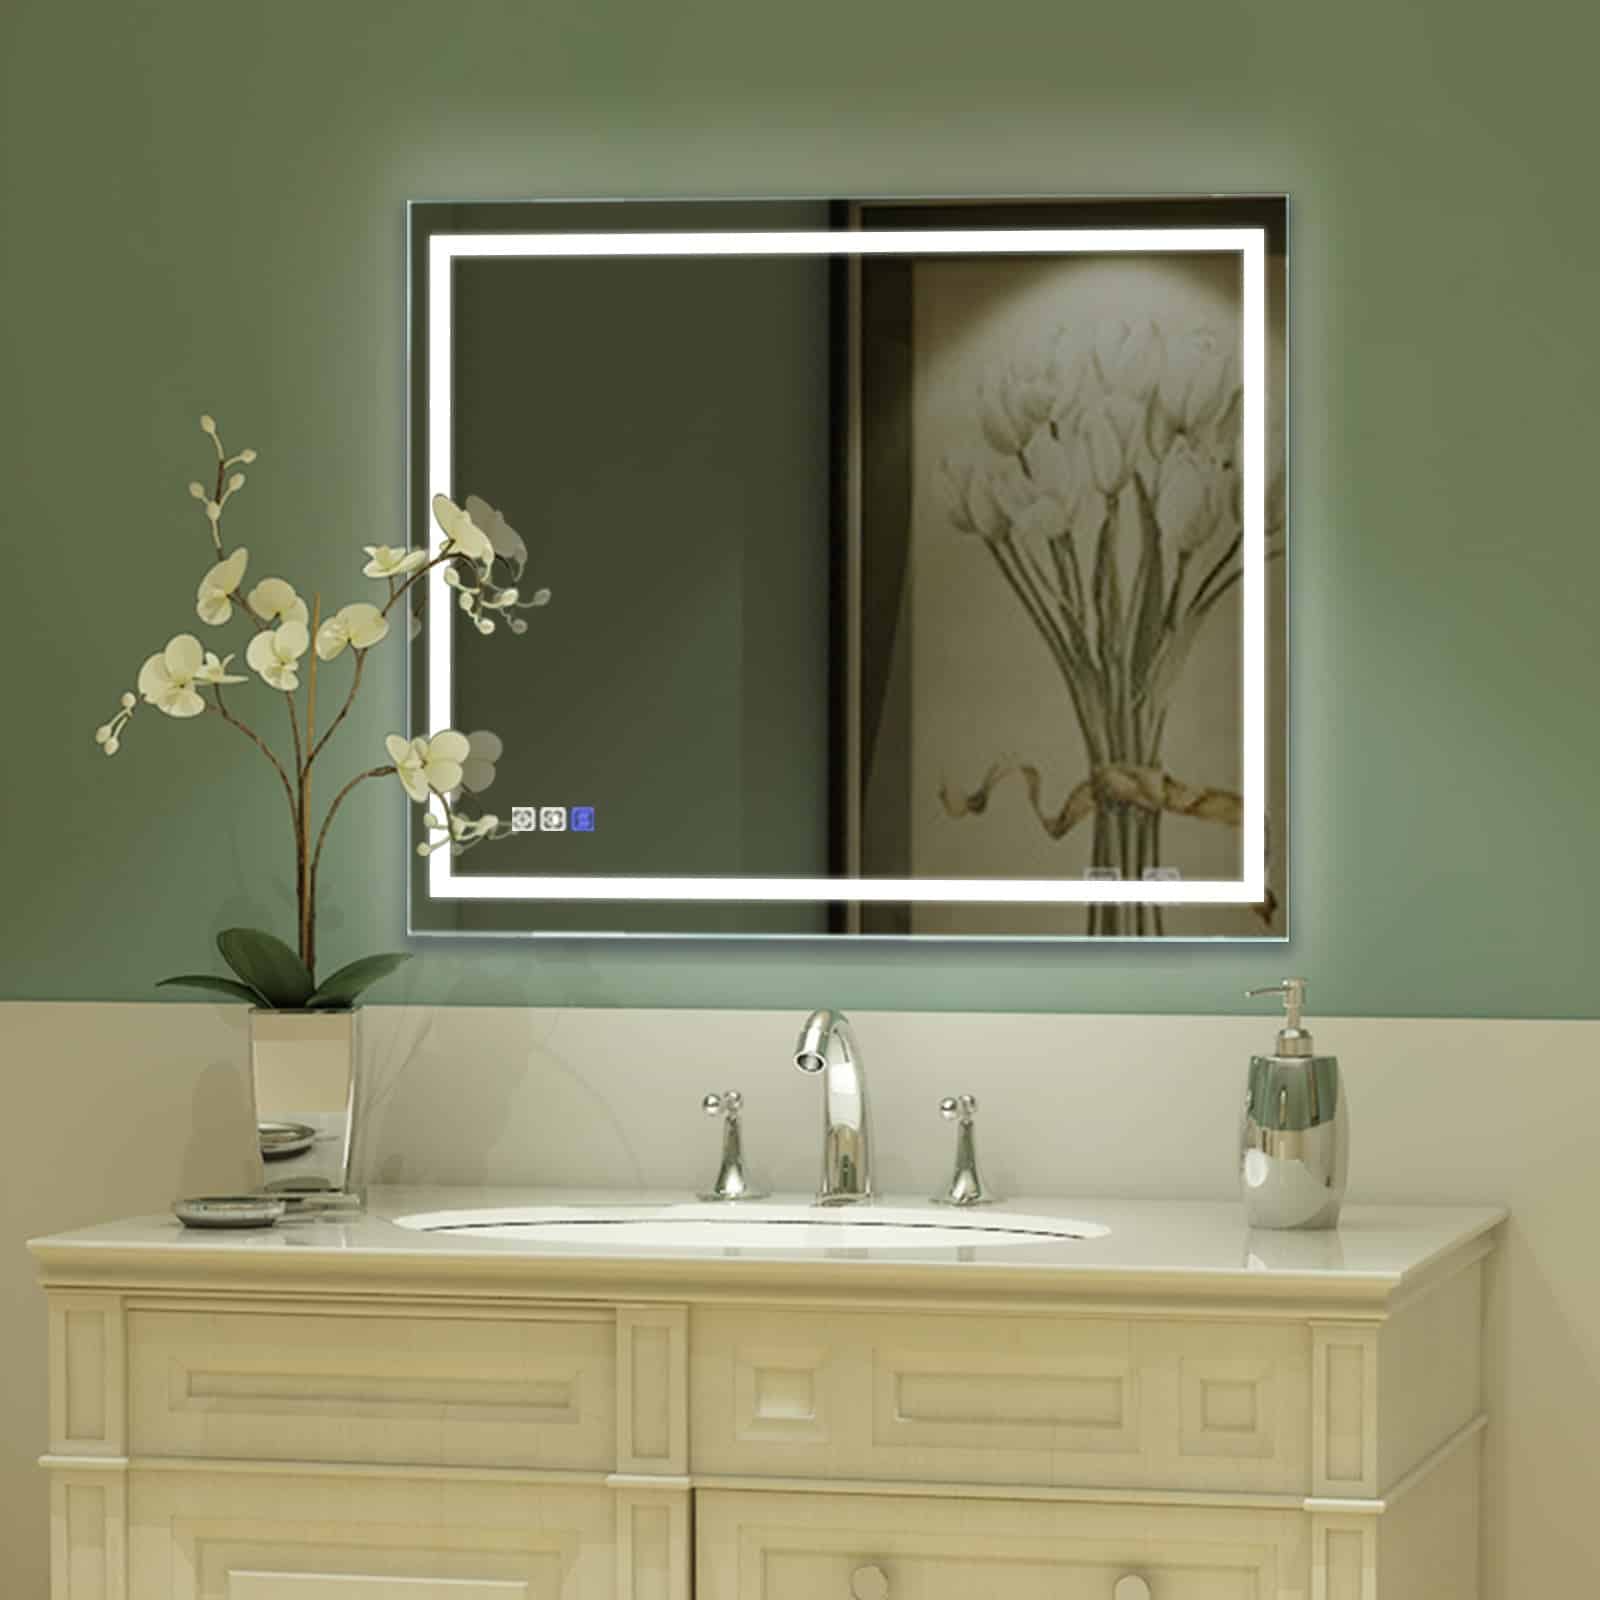 Lighted Mirrors Are A Solution To Limited Space